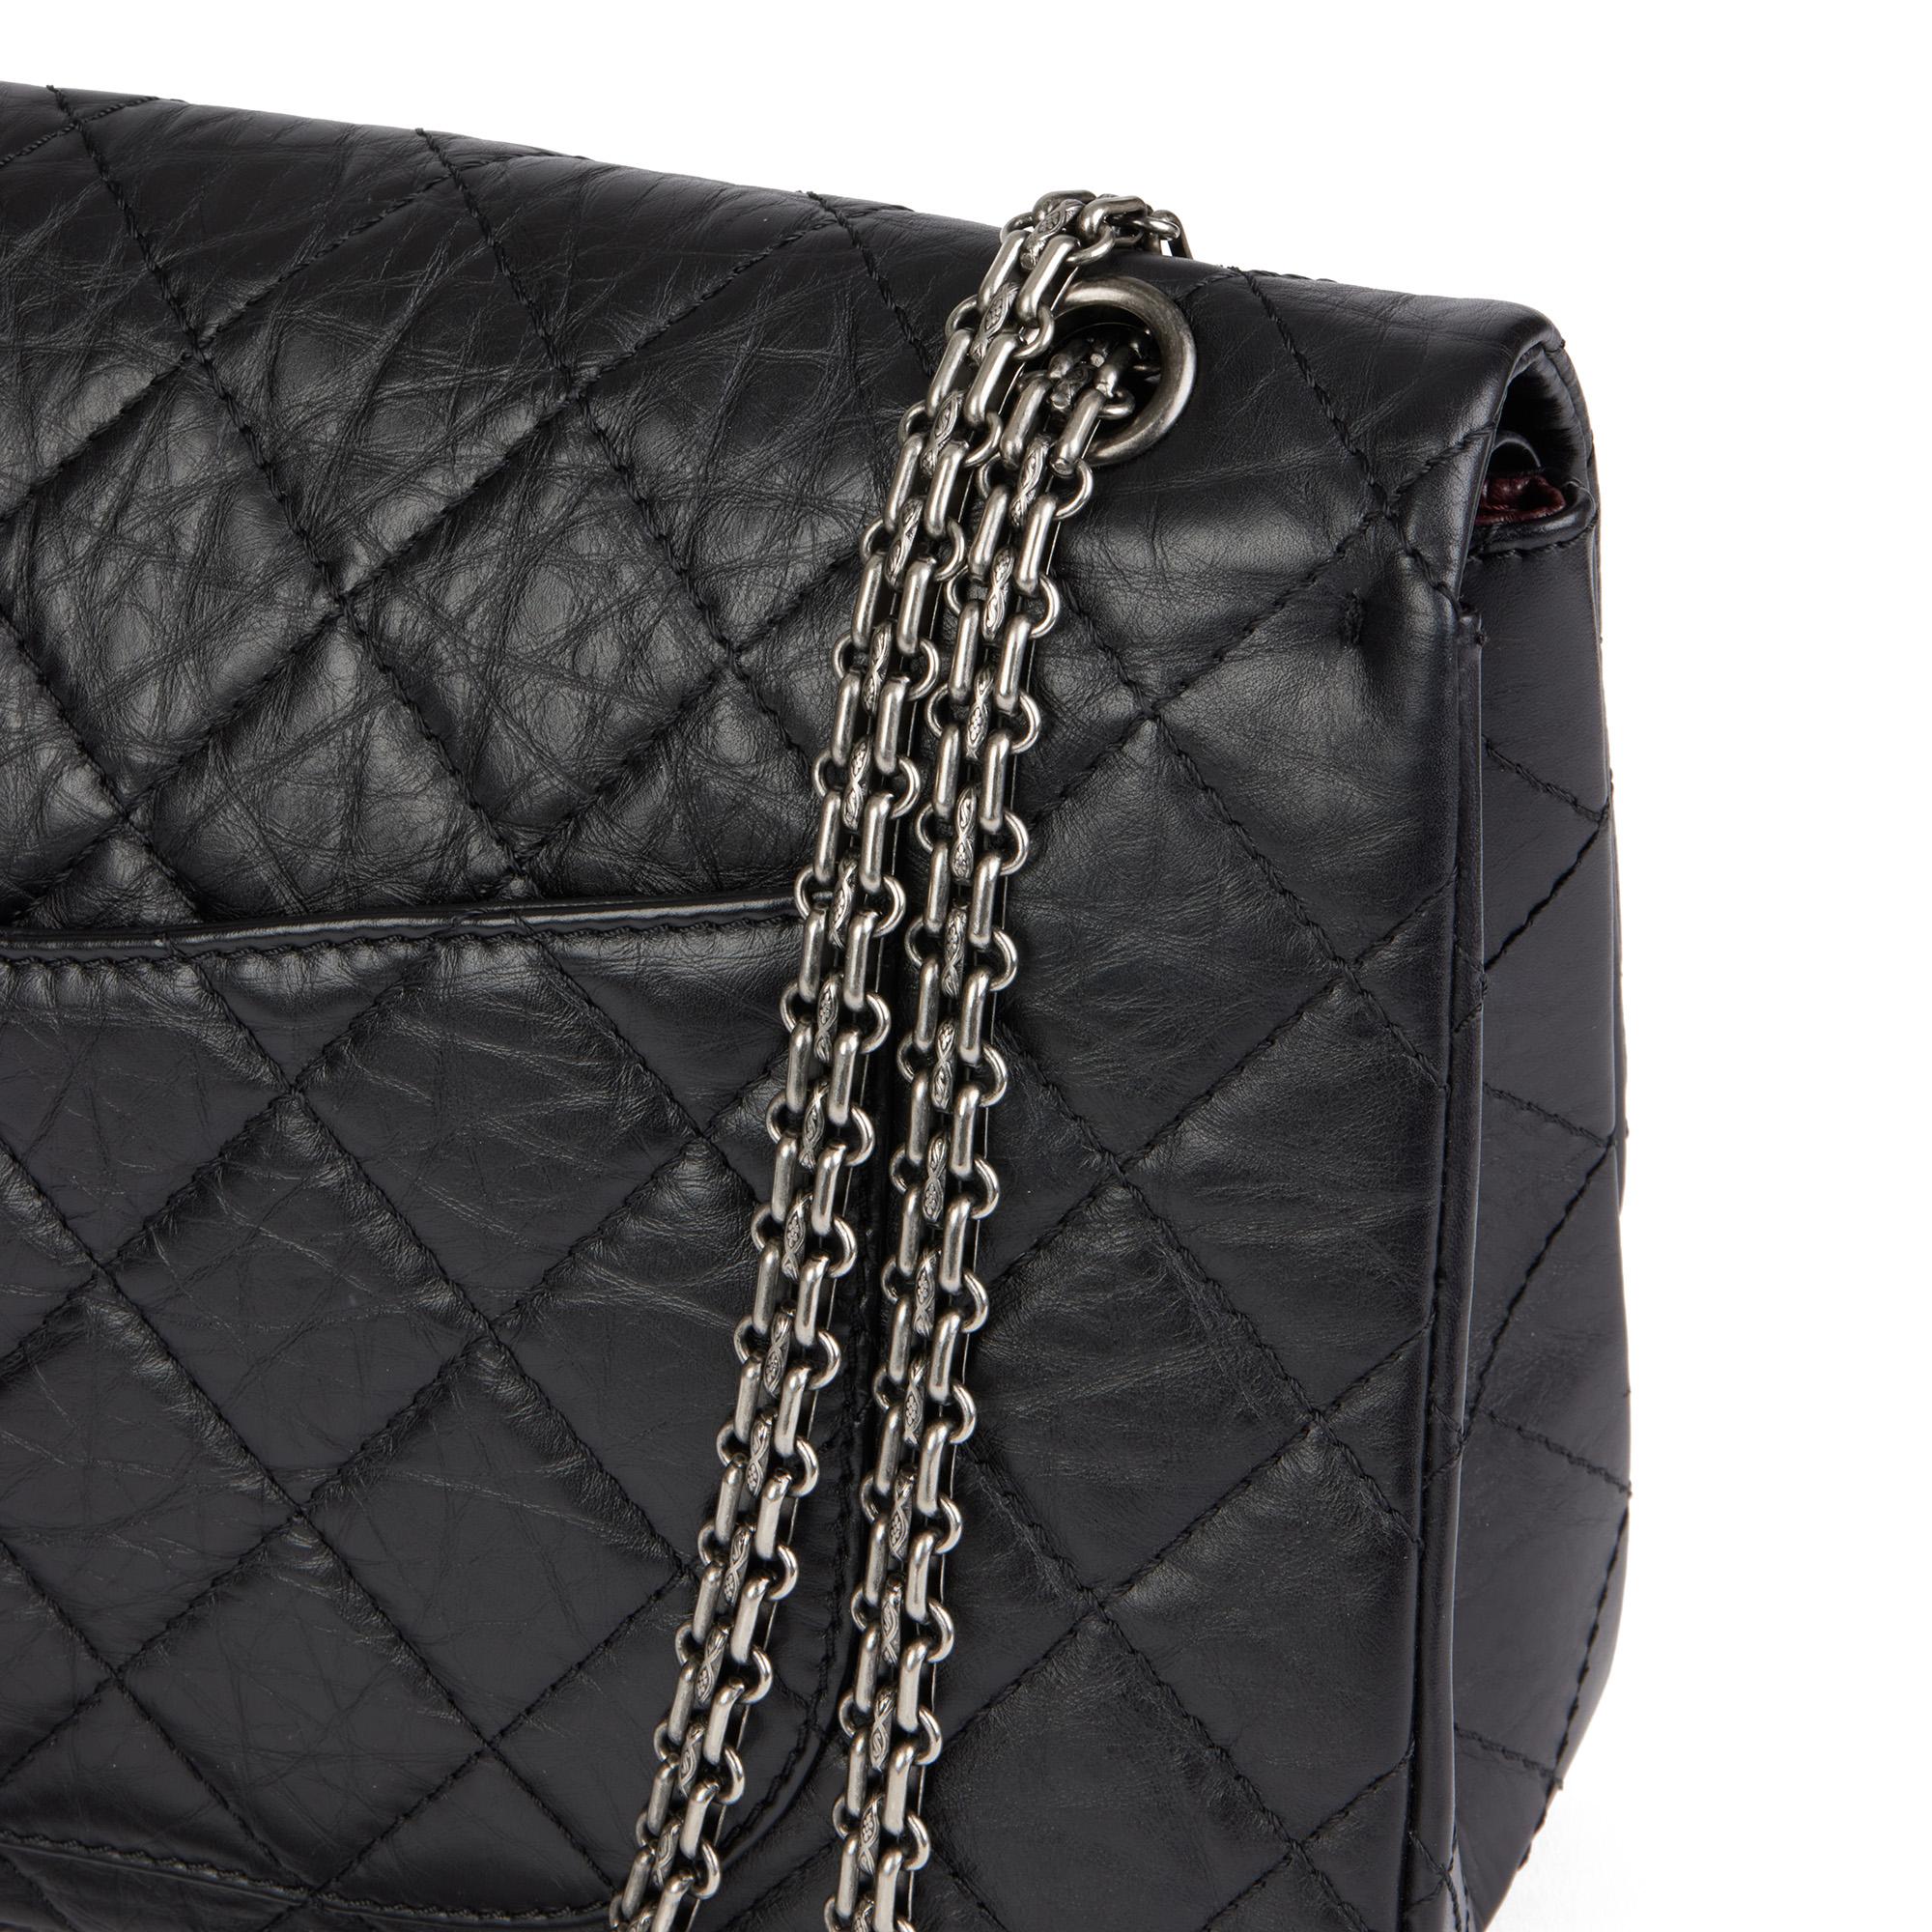 CHANEL Black Quilted Aged Calfskin leather 2.55 Reissue 227 Double Flap Bag 4